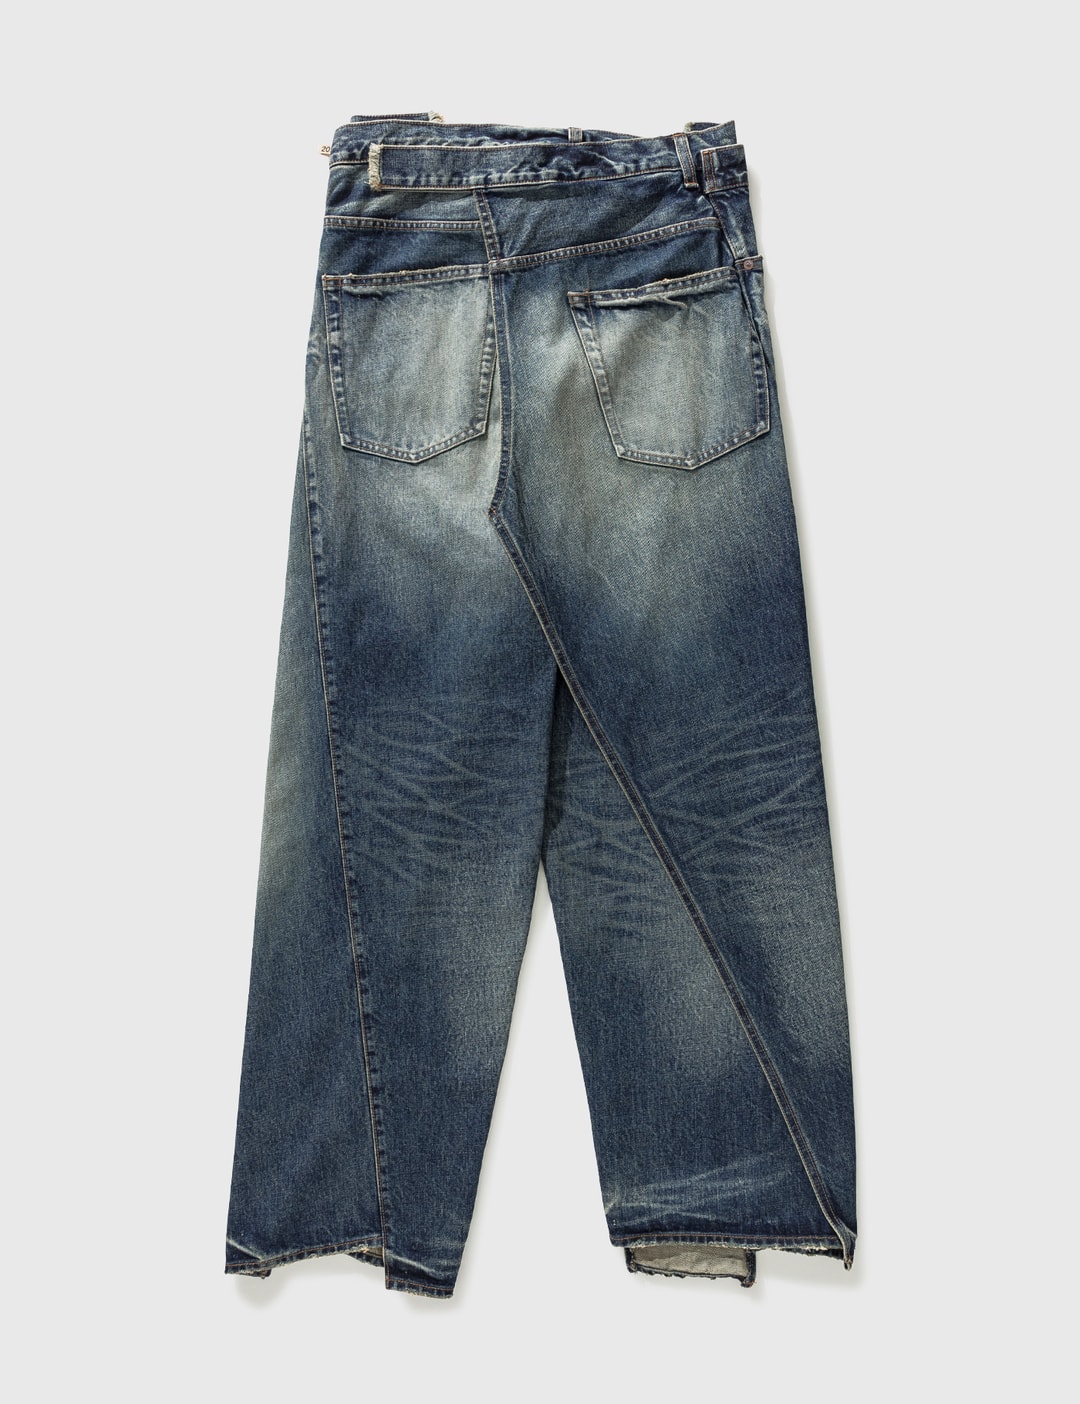 Fantastisch bespotten musicus Maison Mihara Yasuhiro - Slided Piece Jeans | HBX - Globally Curated  Fashion and Lifestyle by Hypebeast